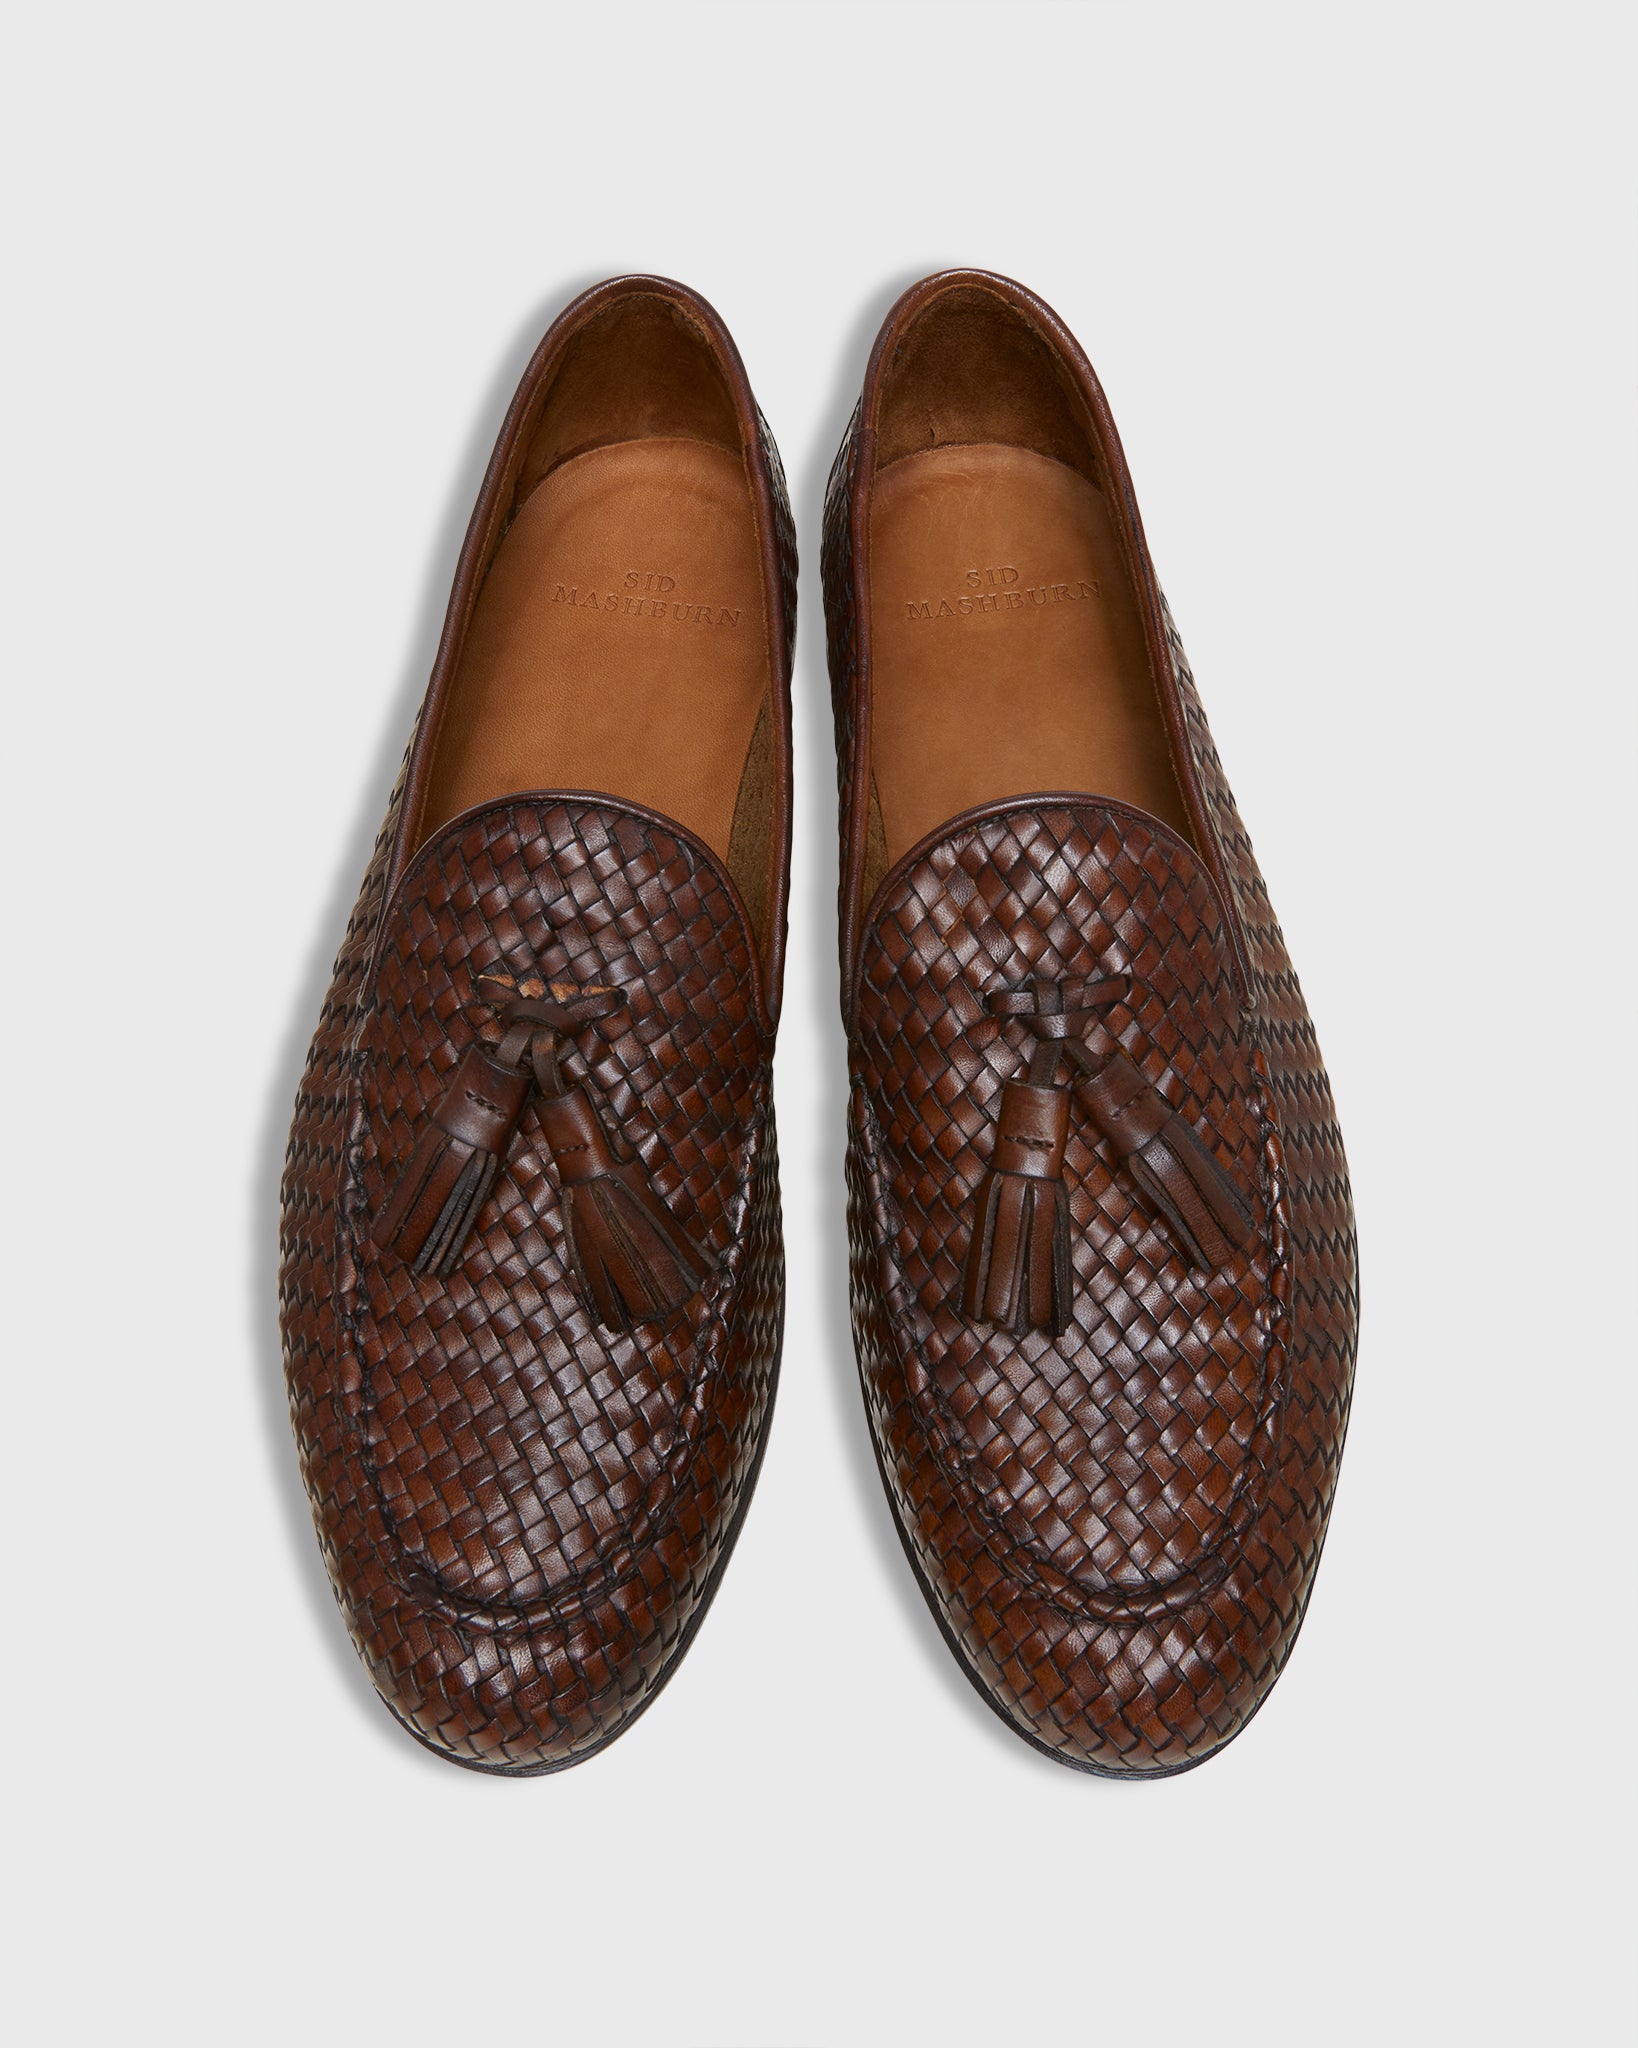 Nassau Tassel Loafer in Brown Woven Leather